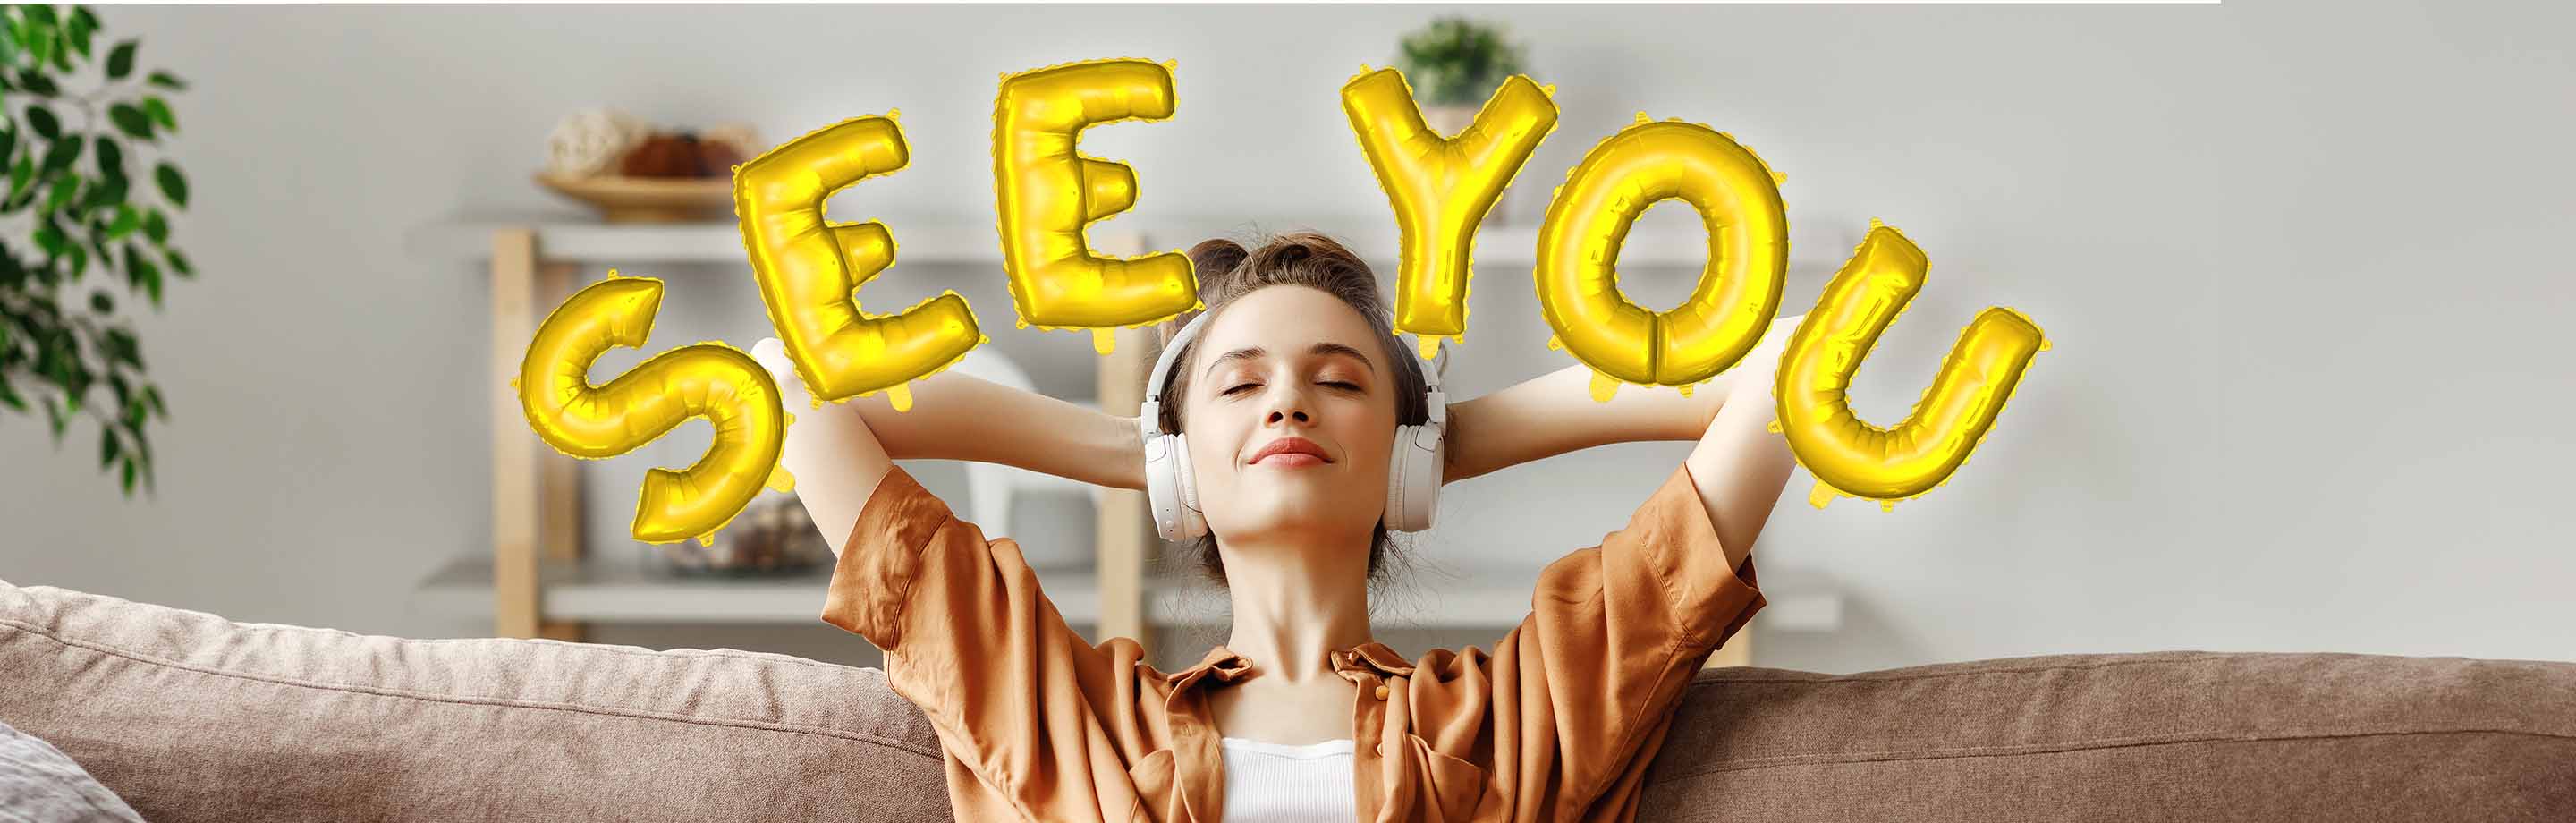 A relaxed young woman with her hands behind her head and headphones on a sofa. Around her head is the lettering "See you" in the form of golden balloons.